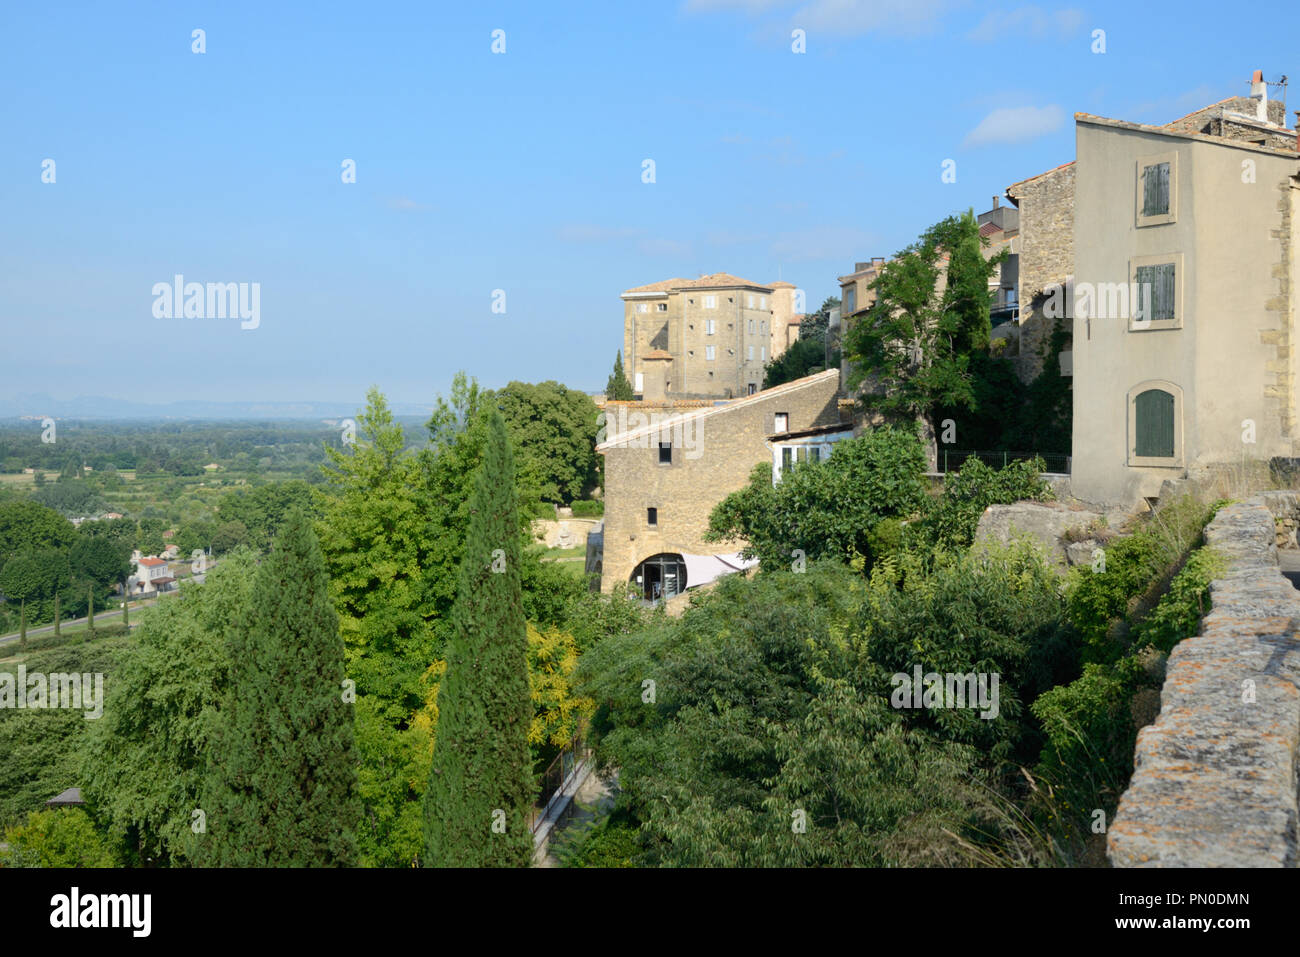 View over the Perched Village of Lauris, Lauris Château or Castle and the Durance Valley, Luberon Provence France Stock Photo